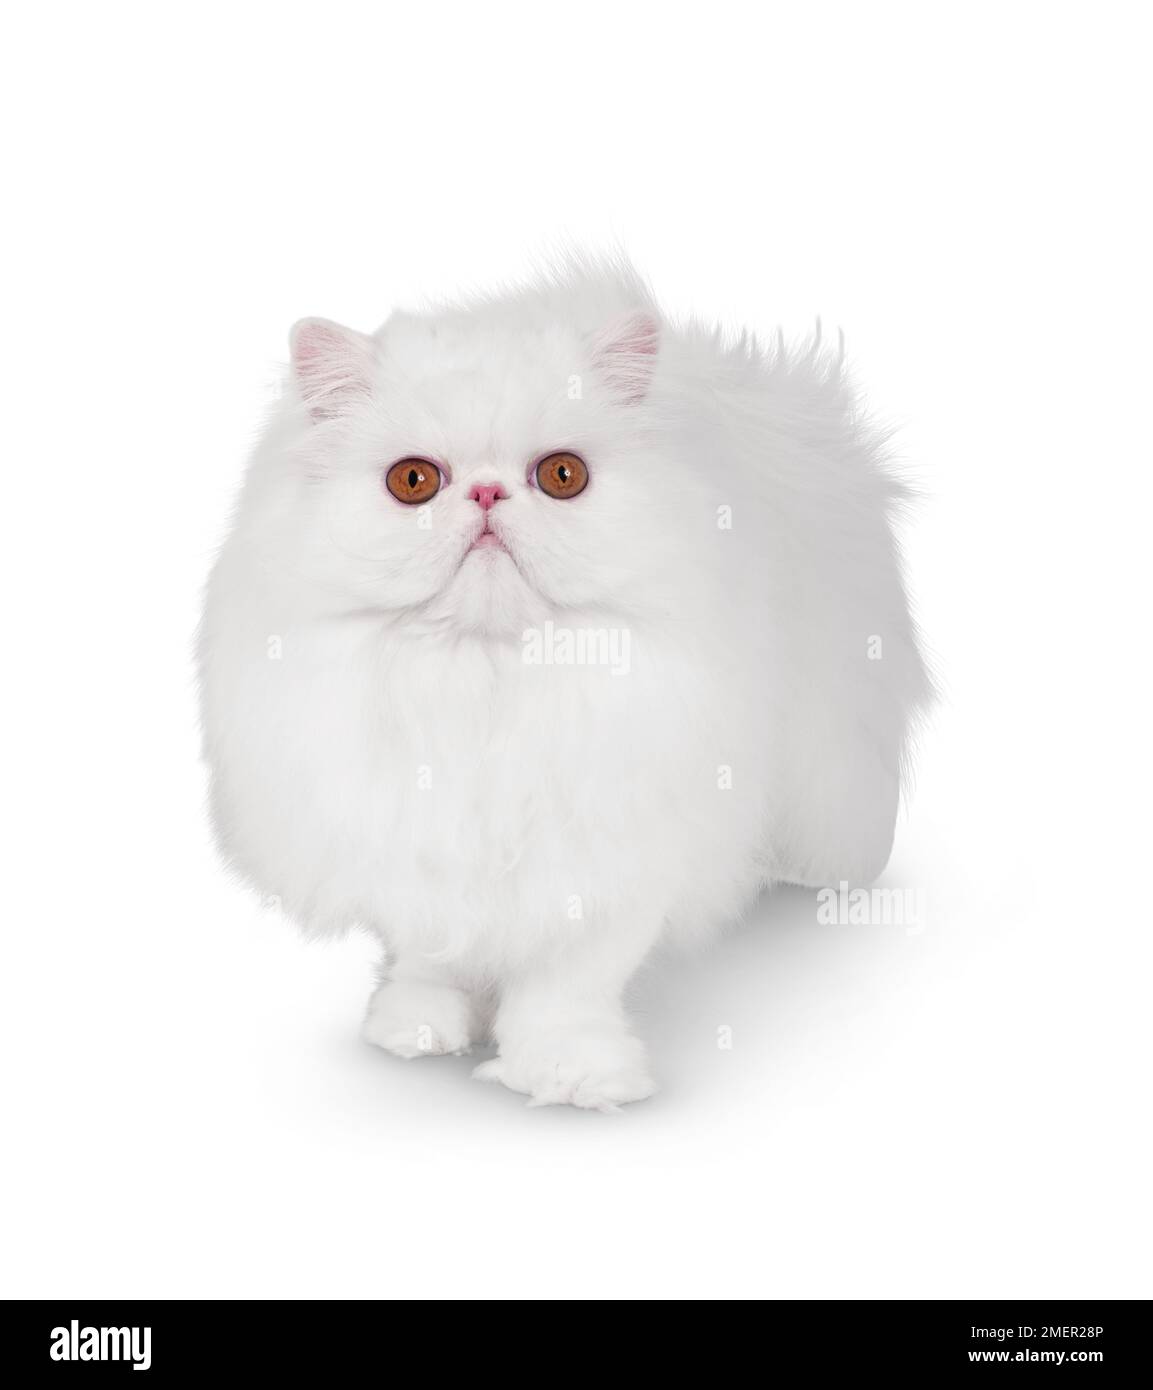 Oranged-eyed White Persian cat standing looking at camera, front view Stock Photo